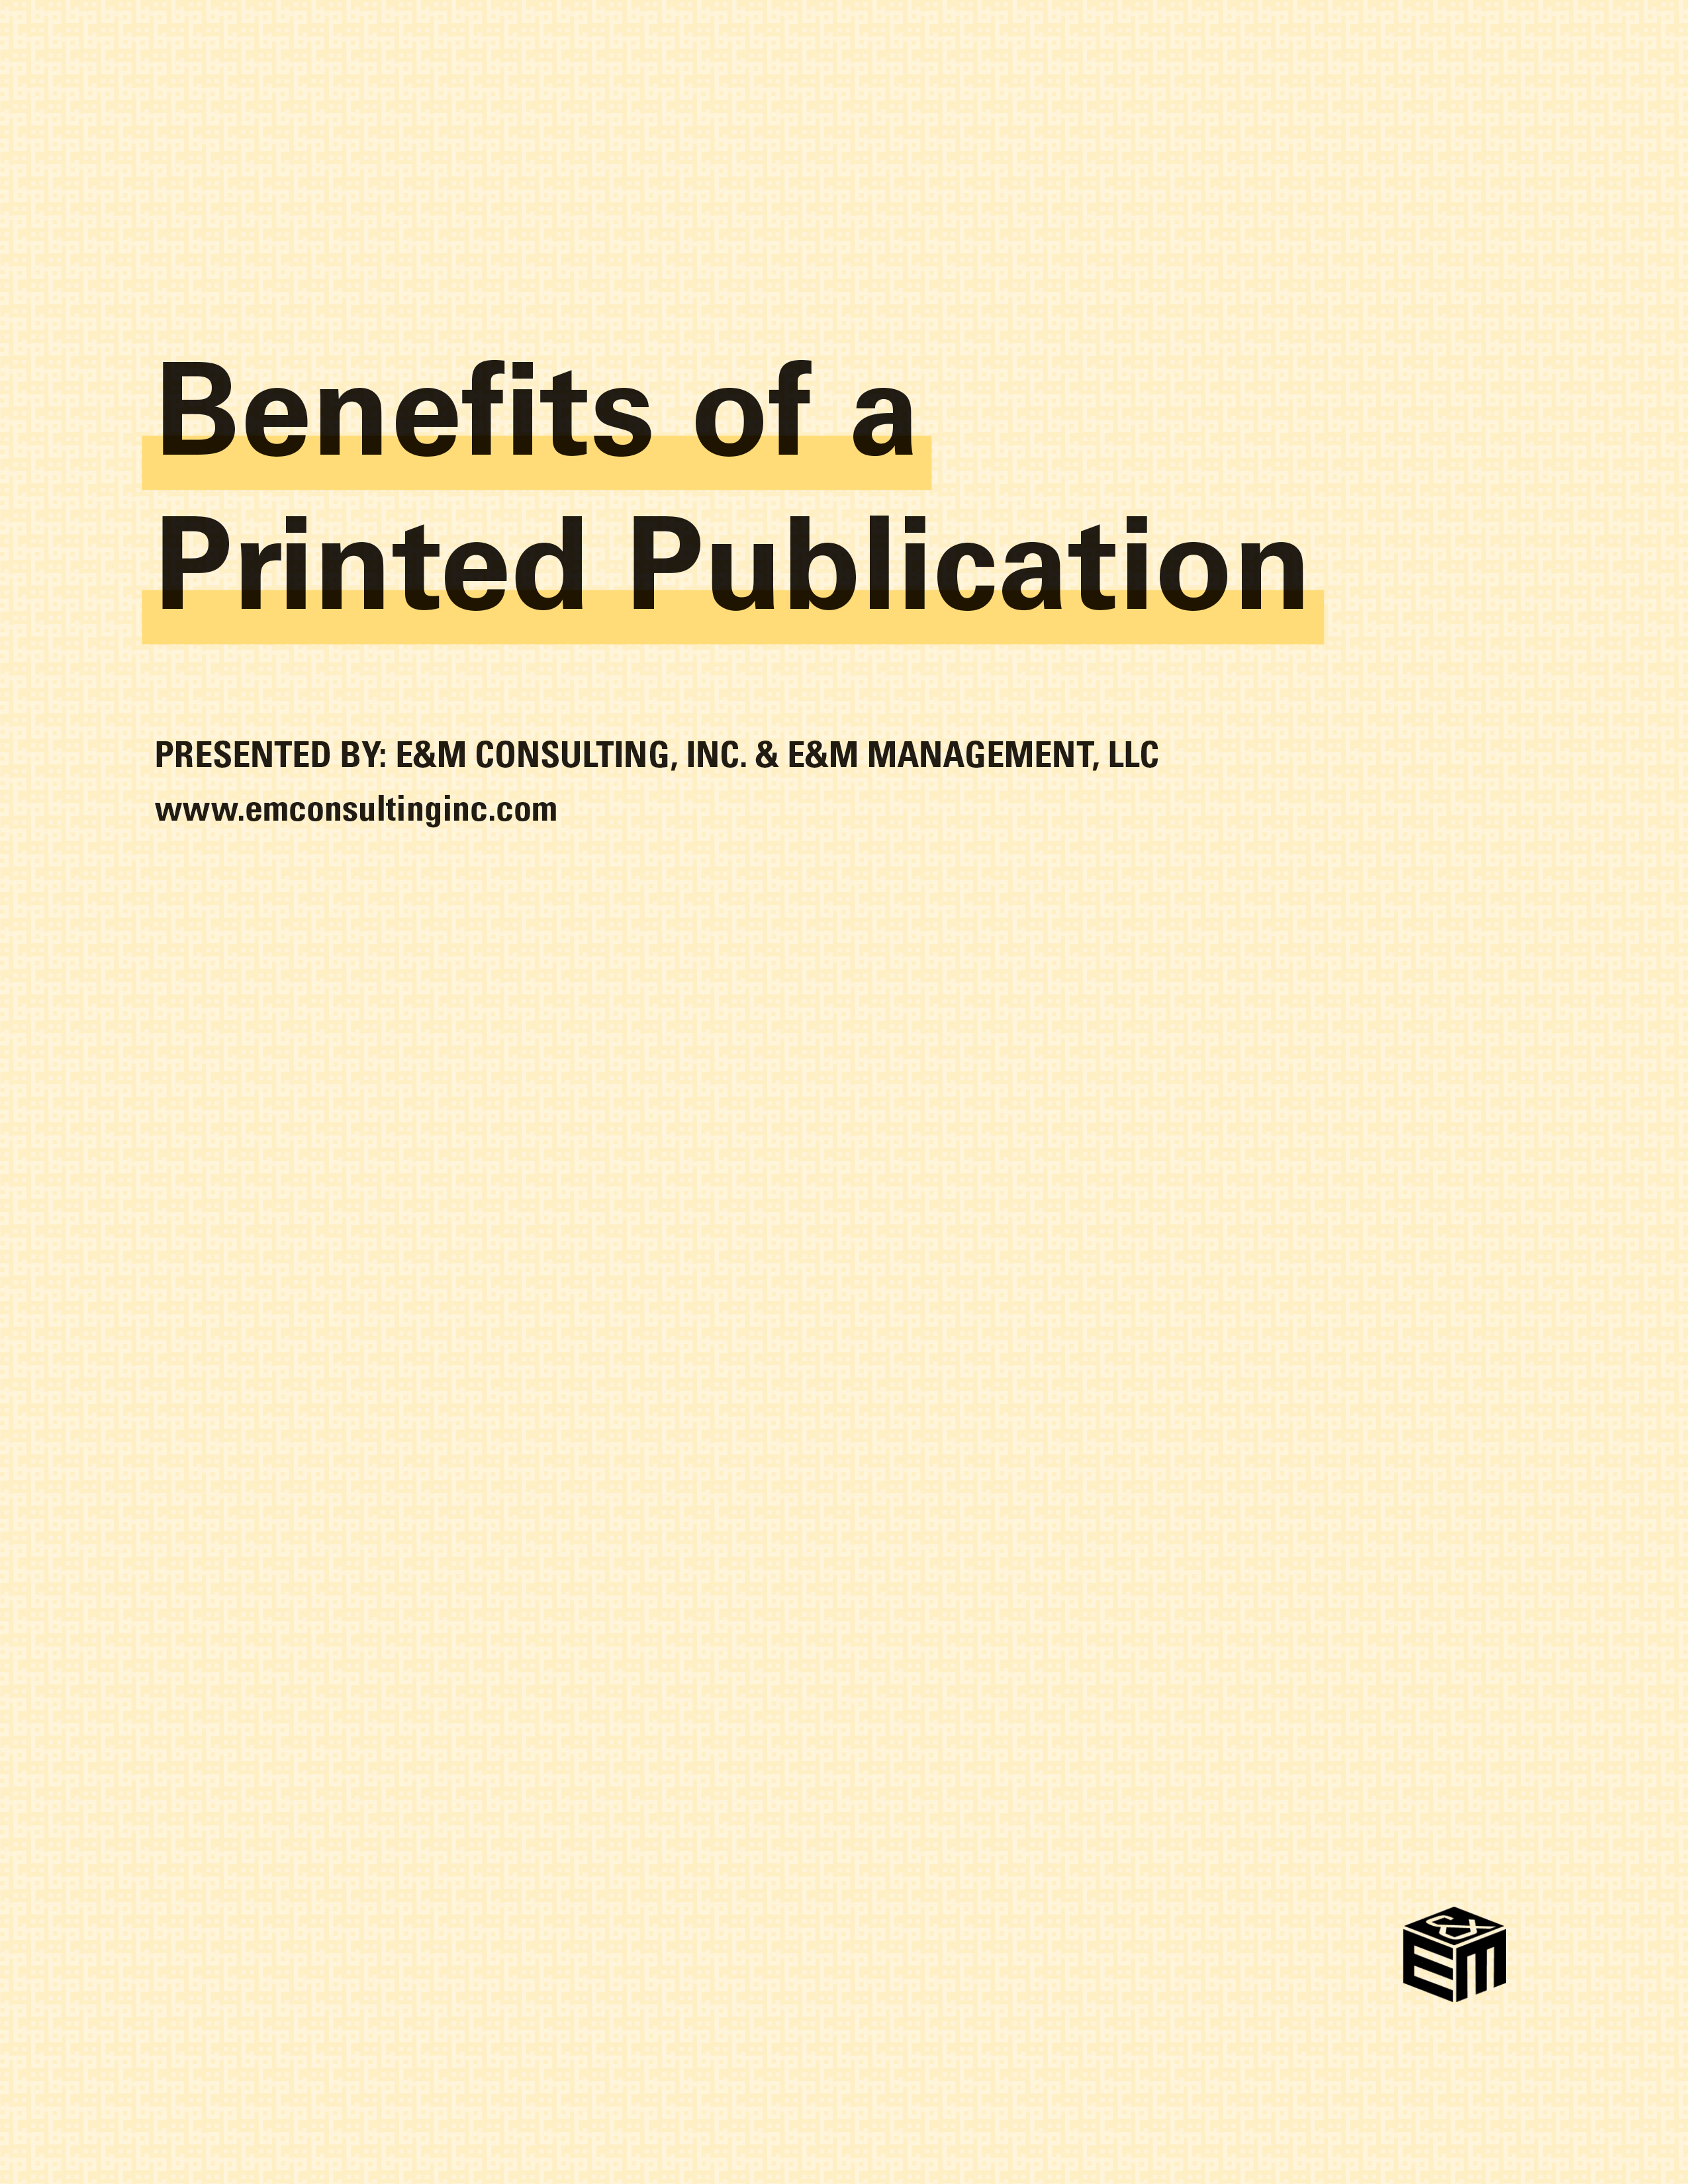 Benefits of a Printed Publication